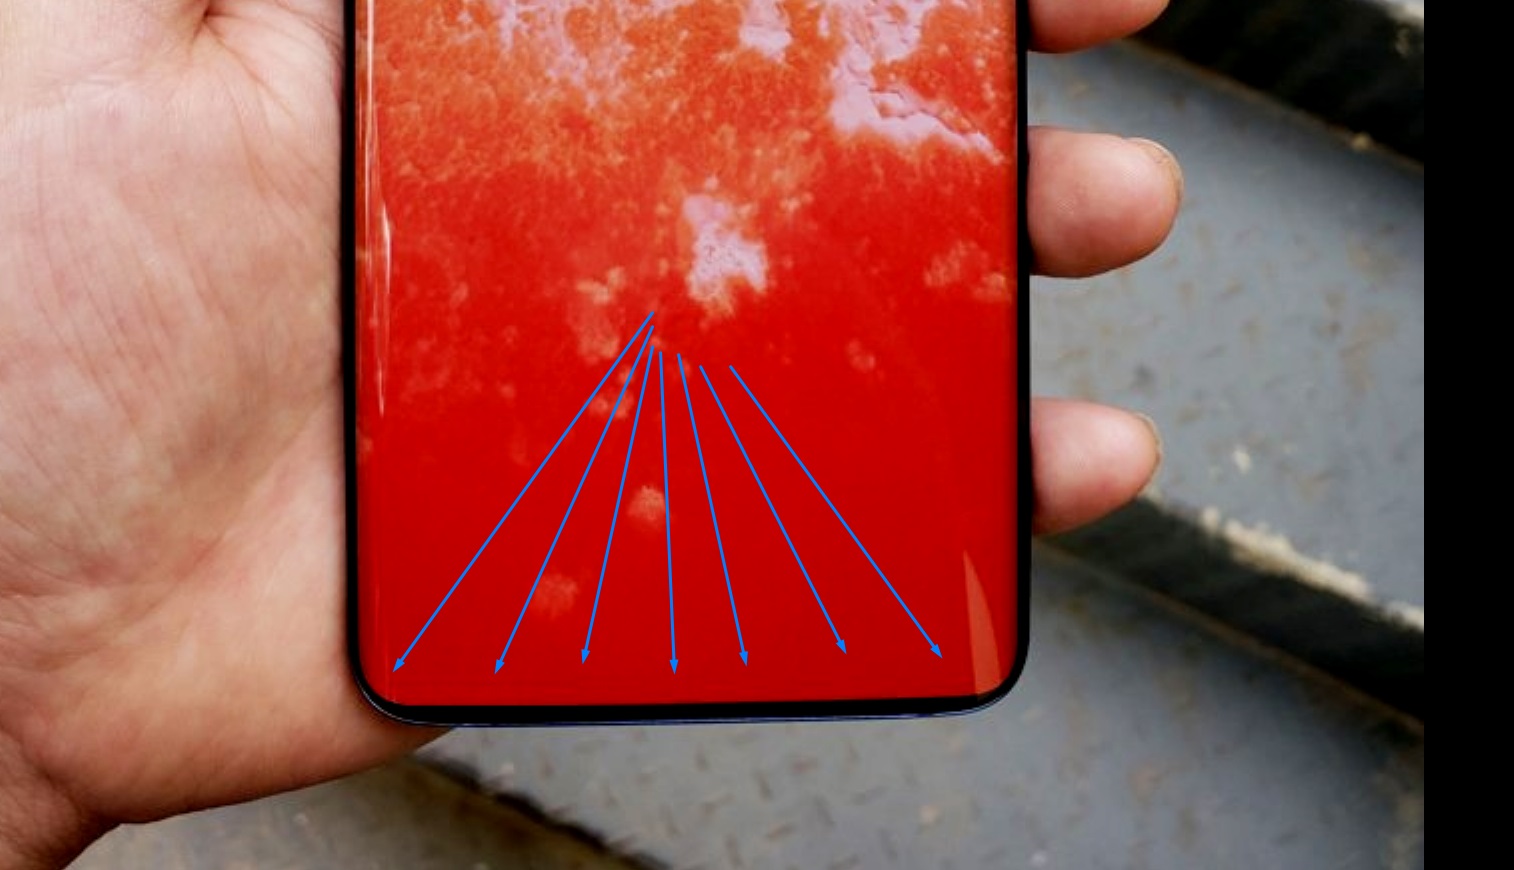 Samsung Galaxy S10 fake photo in a person's hand.